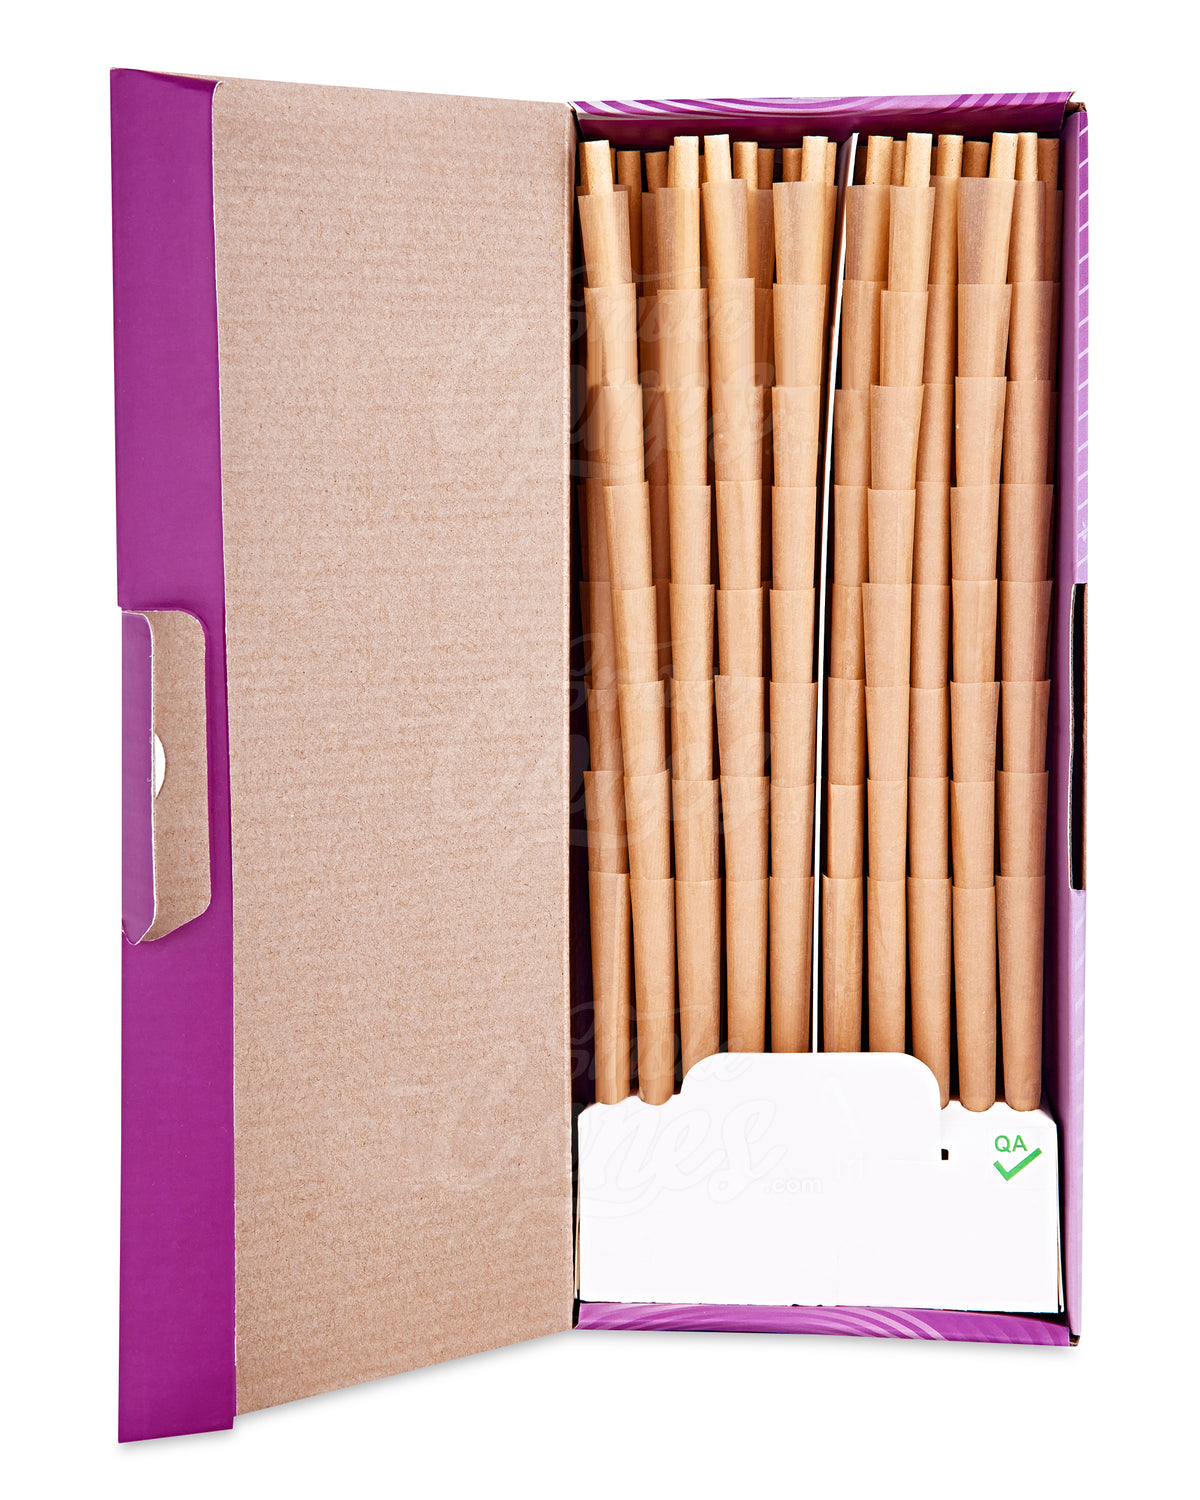 Cones + Supply King Size Pre Rolled Natural Paper Cones 900/Box